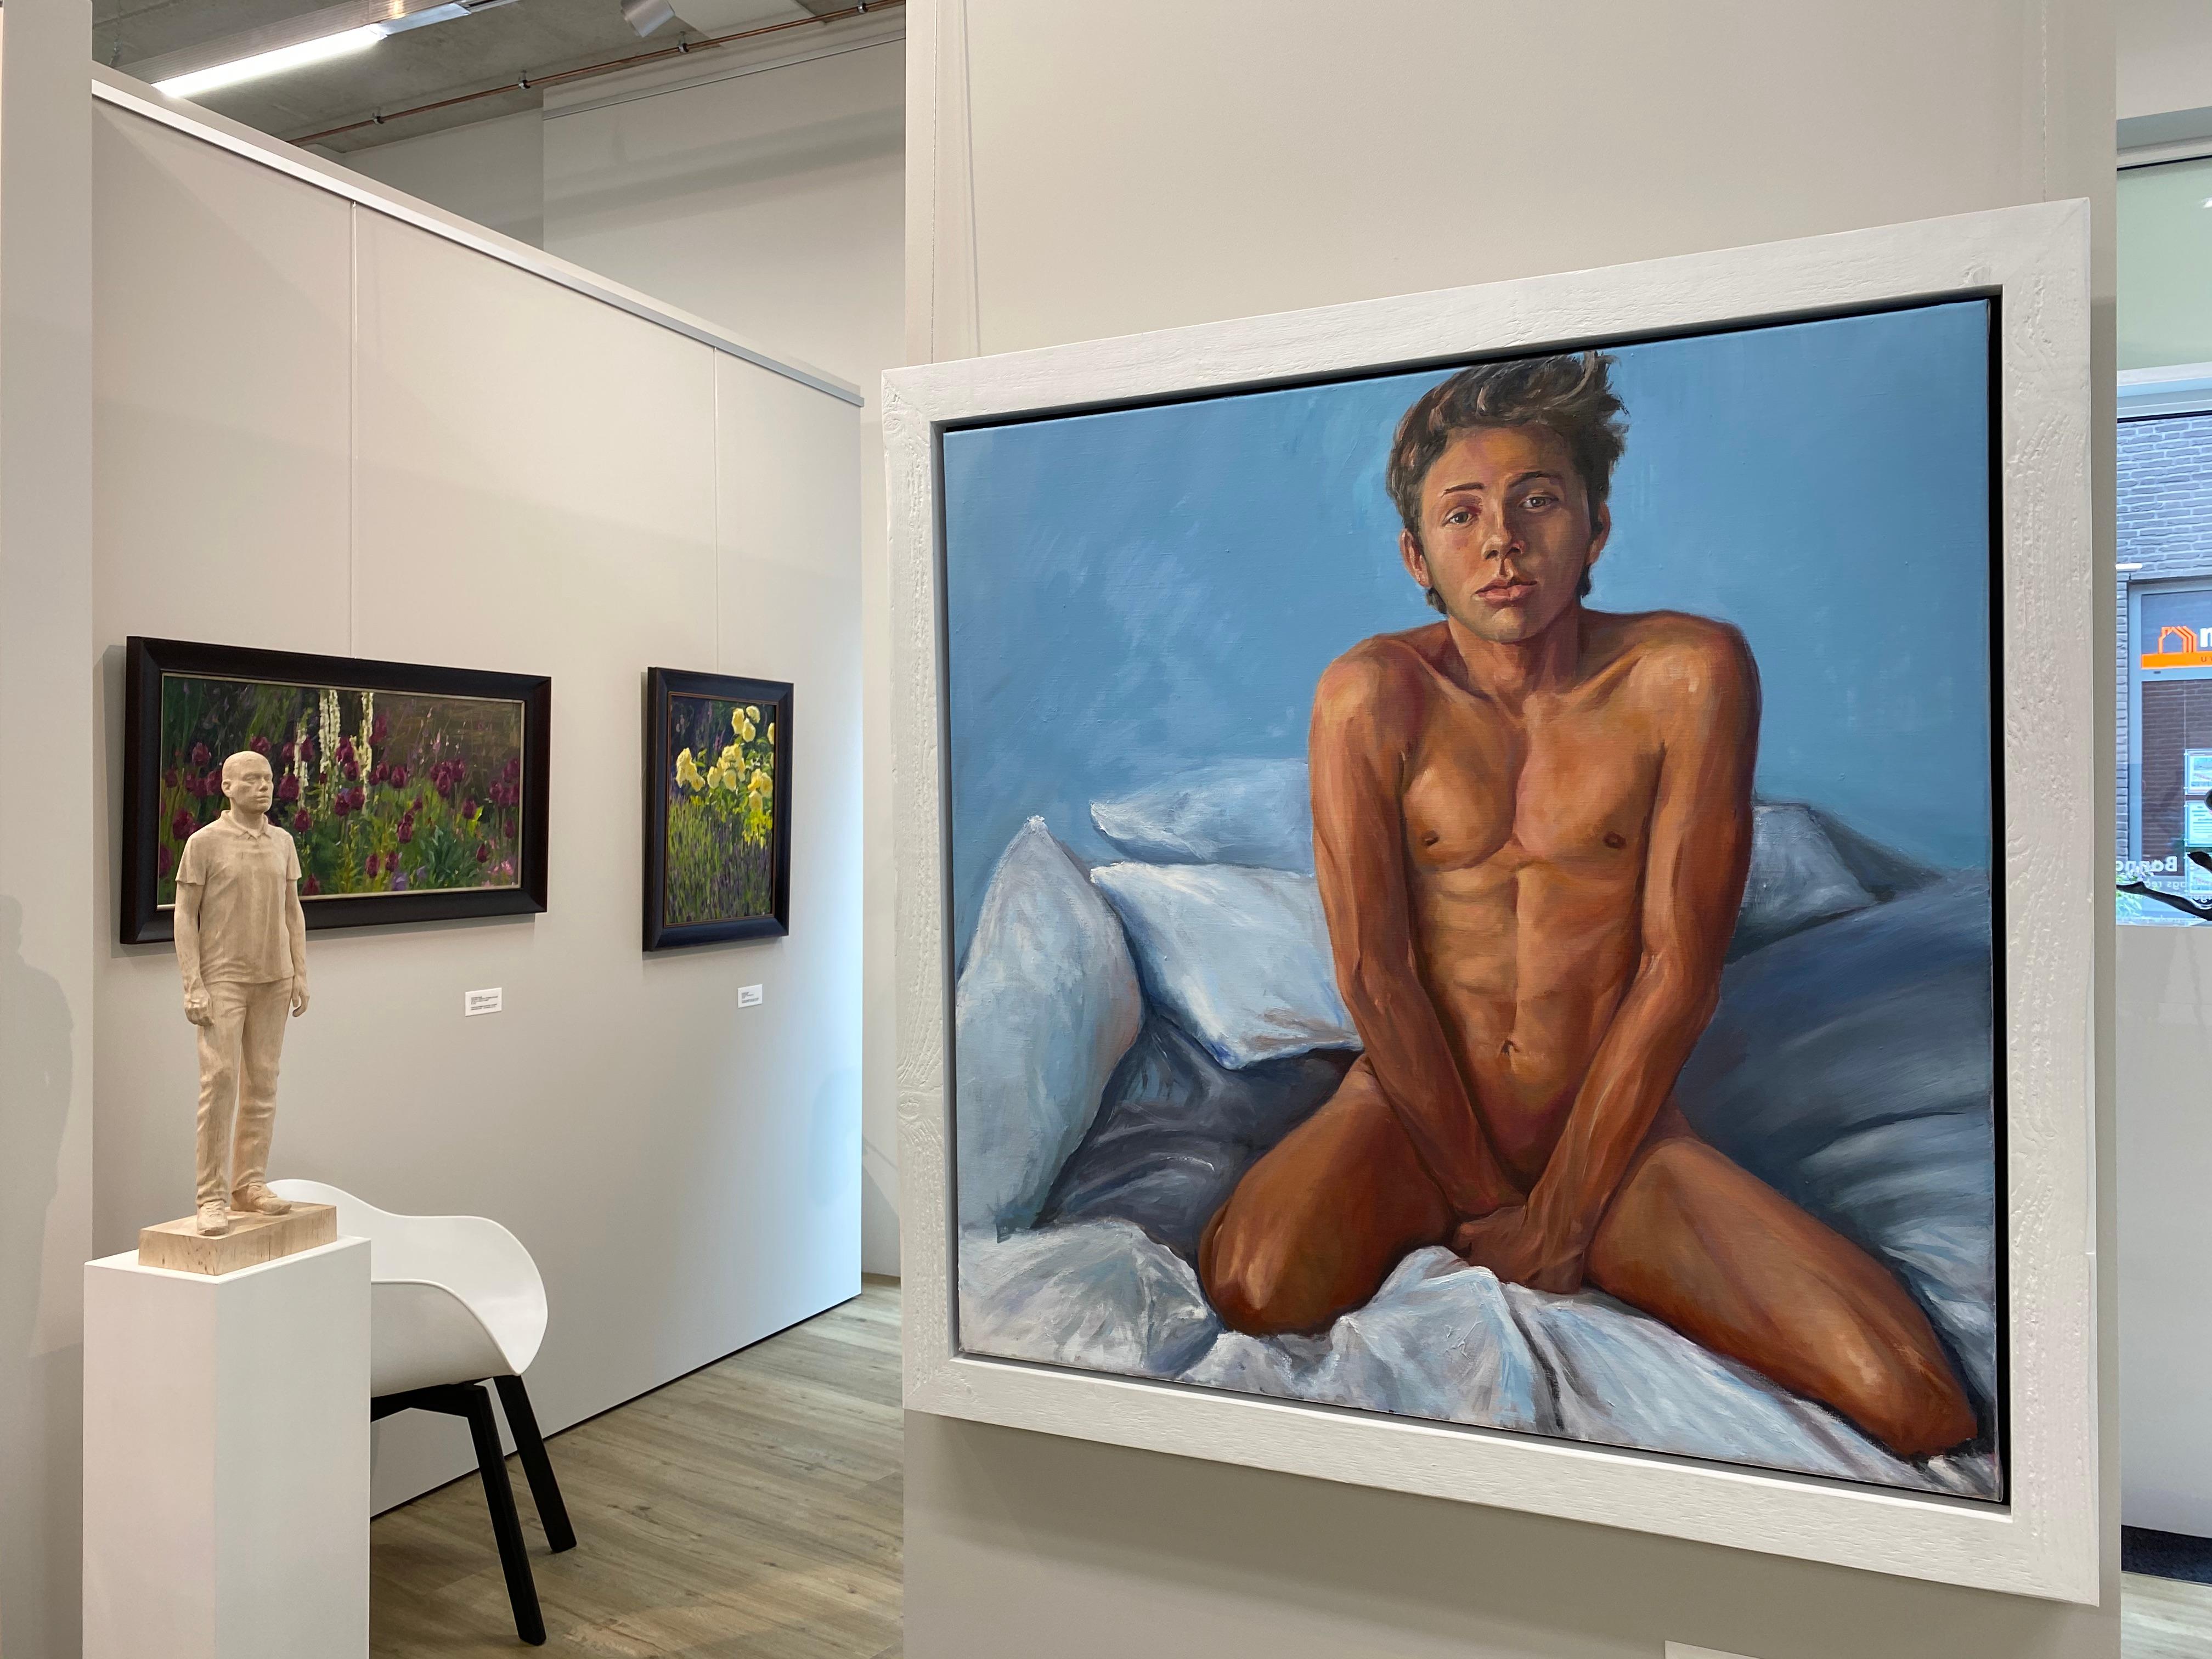 Bedroom-21st Century Figurative painting of a nude boy  - Painting by David van der Linden